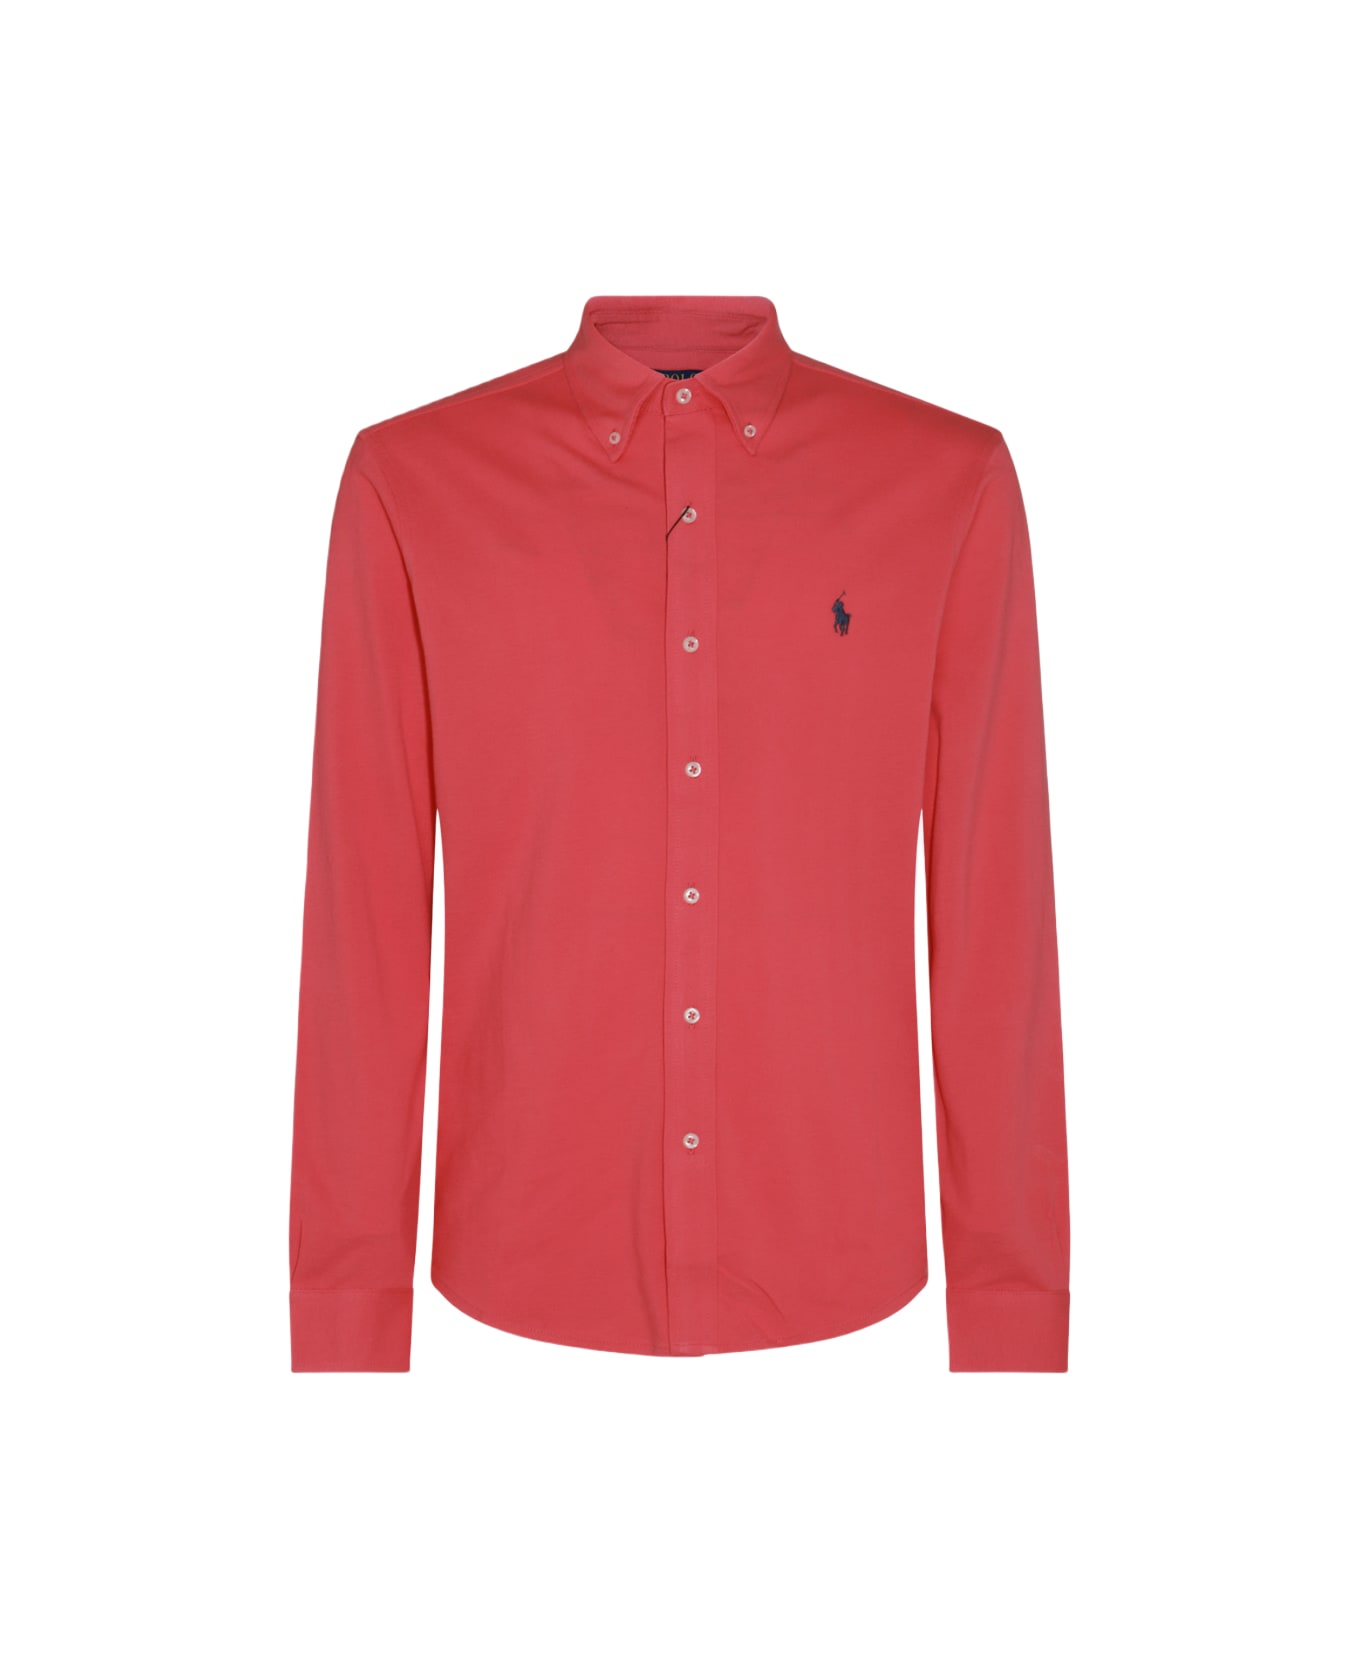 Polo Ralph Lauren Red Cotton Shirt - PALE RED